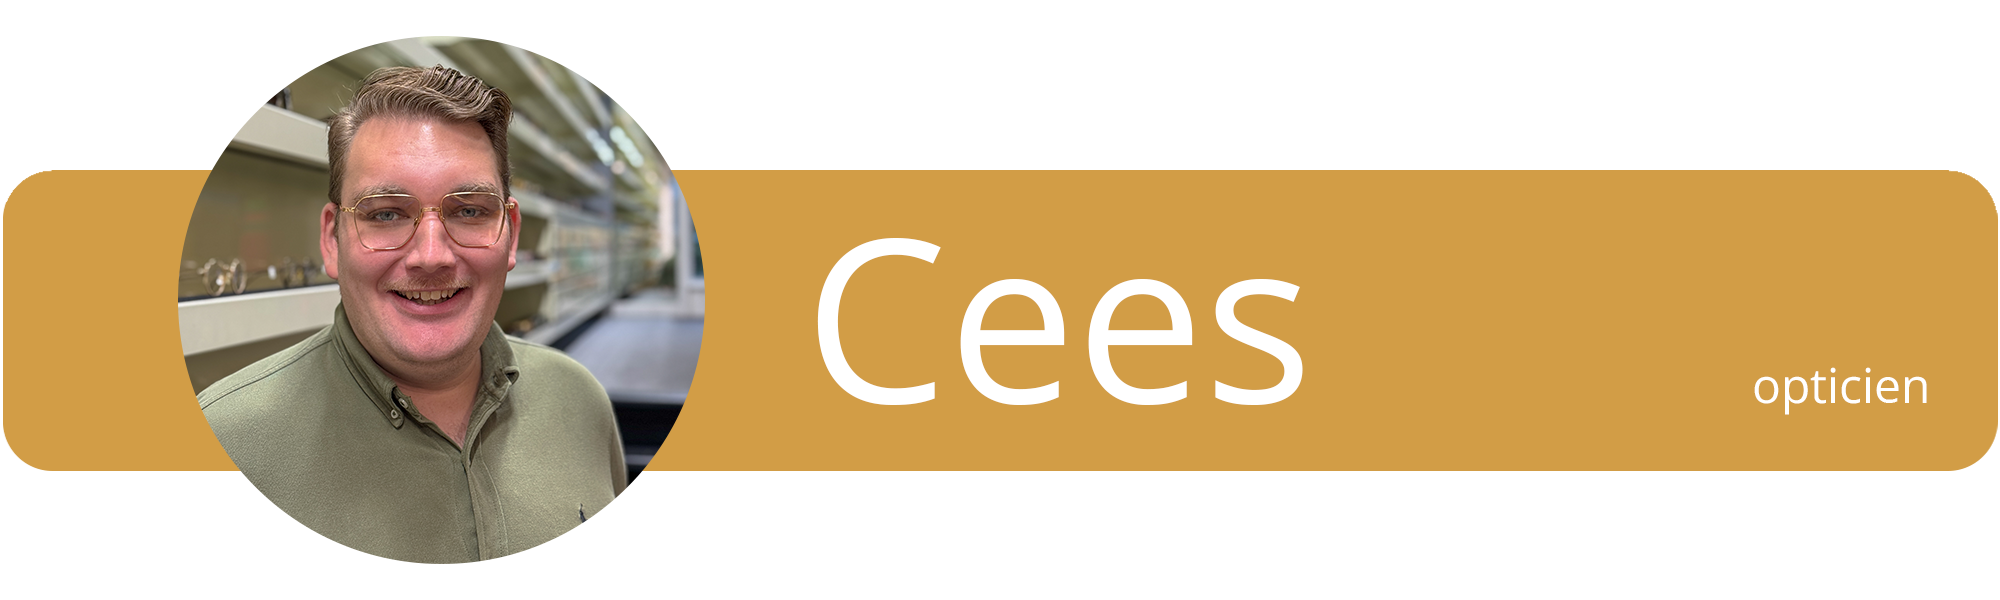 Cees